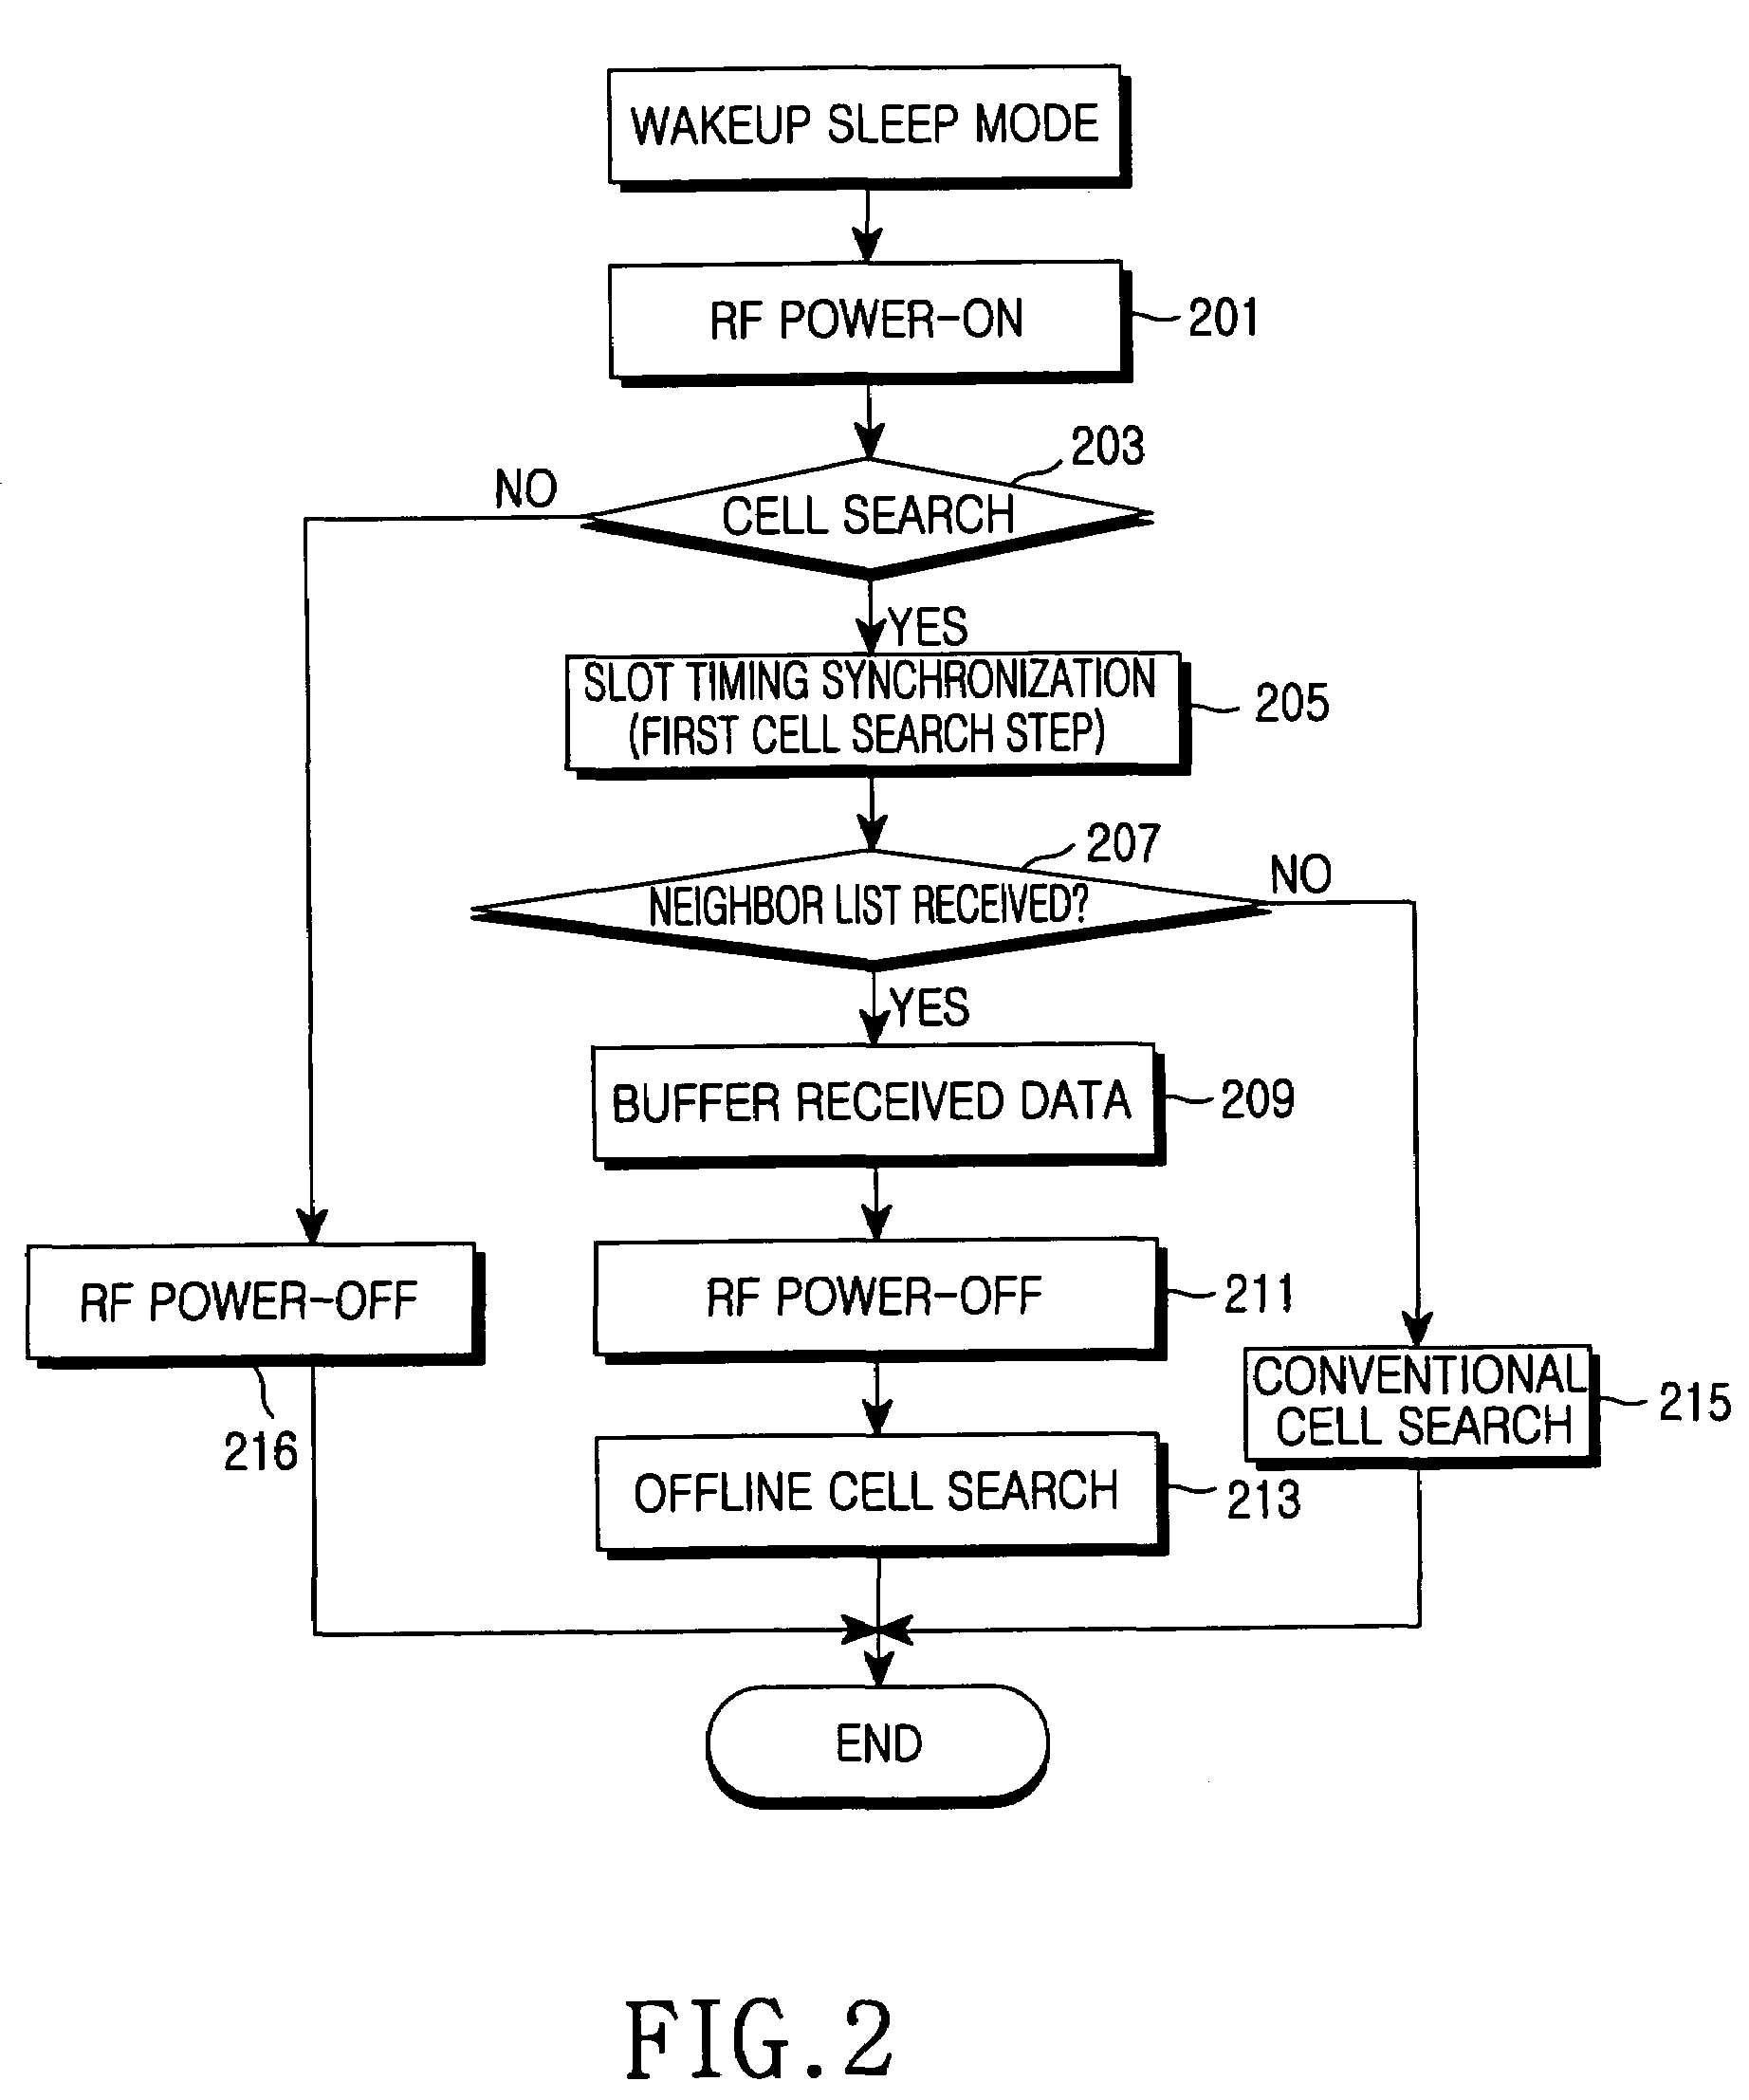 Cell search method in discontinuous reception mode in a mobile communication system